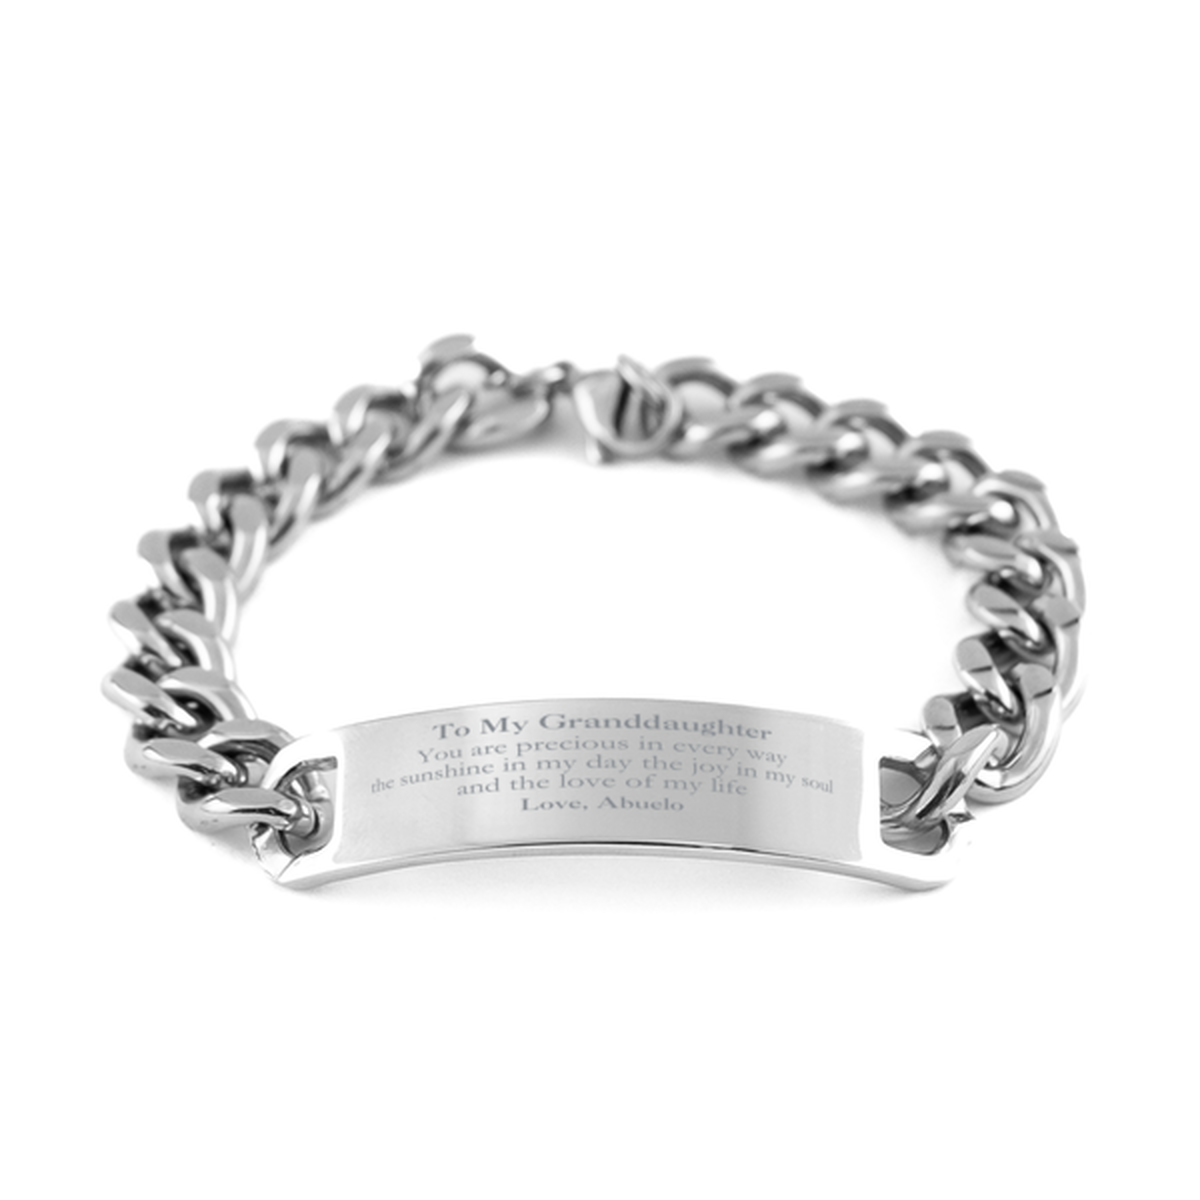 Graduation Gifts for Granddaughter Cuban Chain Stainless Steel Bracelet Present from Abuelo, Christmas Granddaughter Birthday Gifts Granddaughter You are precious in every way the sunshine in my day. Love, Abuelo